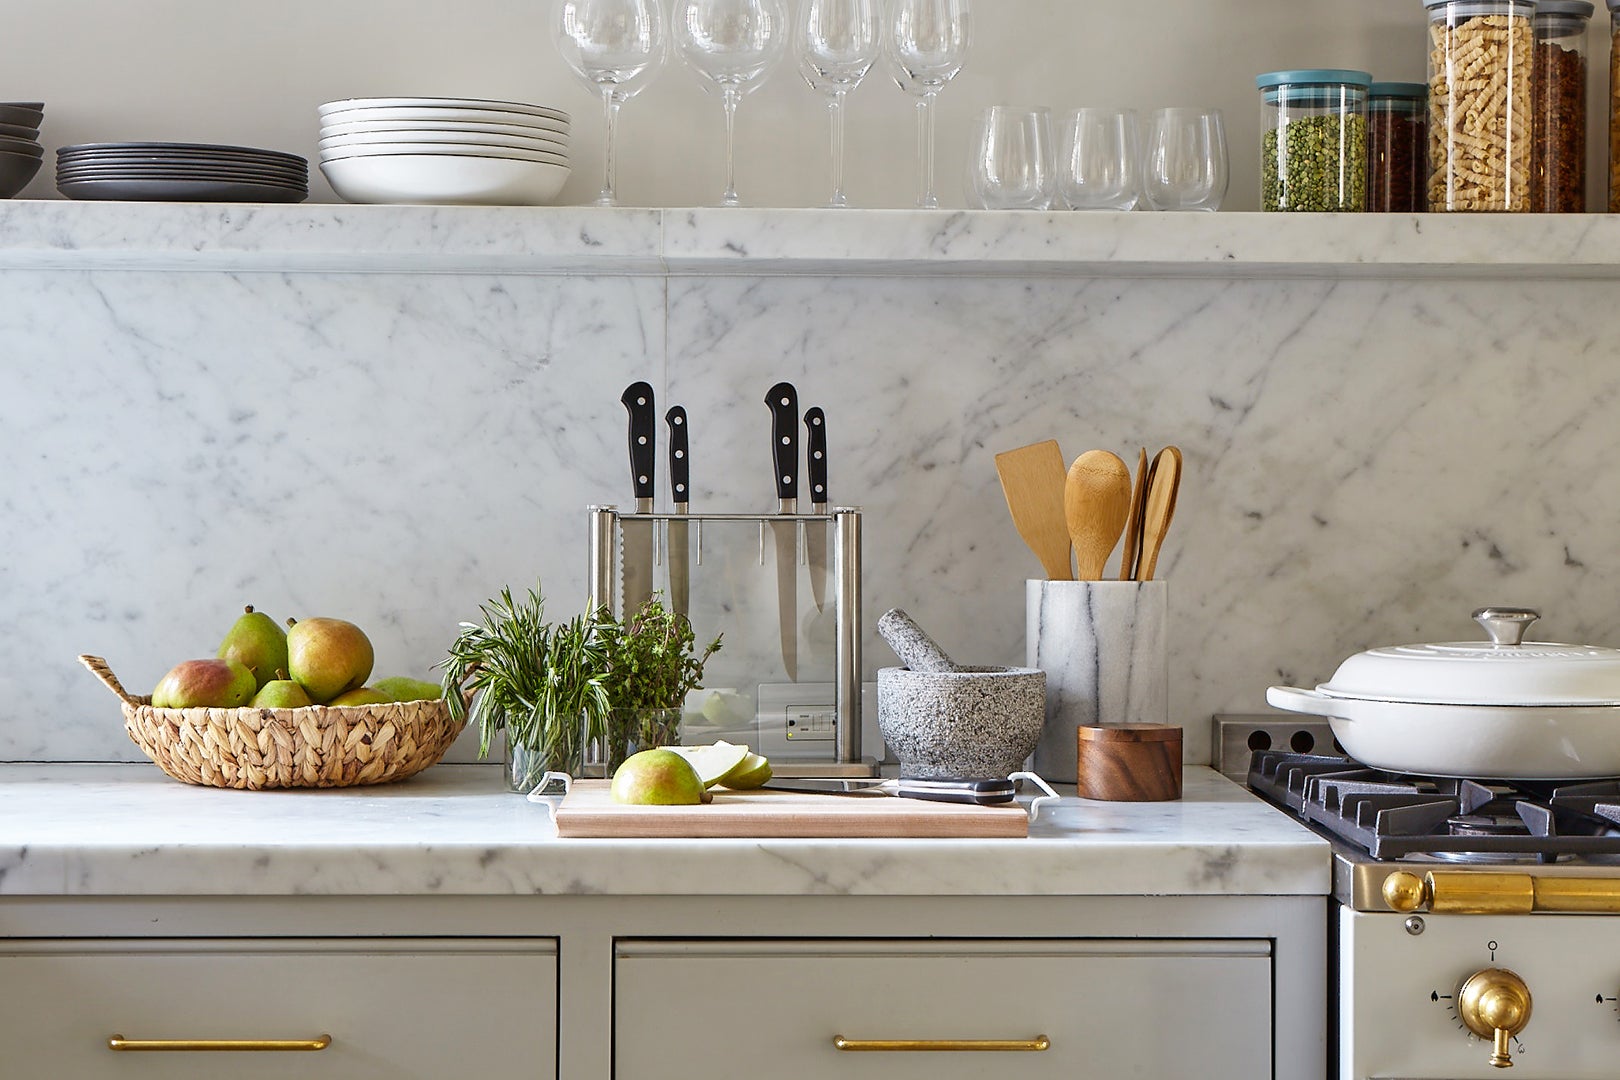 Toss the Knife Block and Try These Knife Storage Ideas Instead